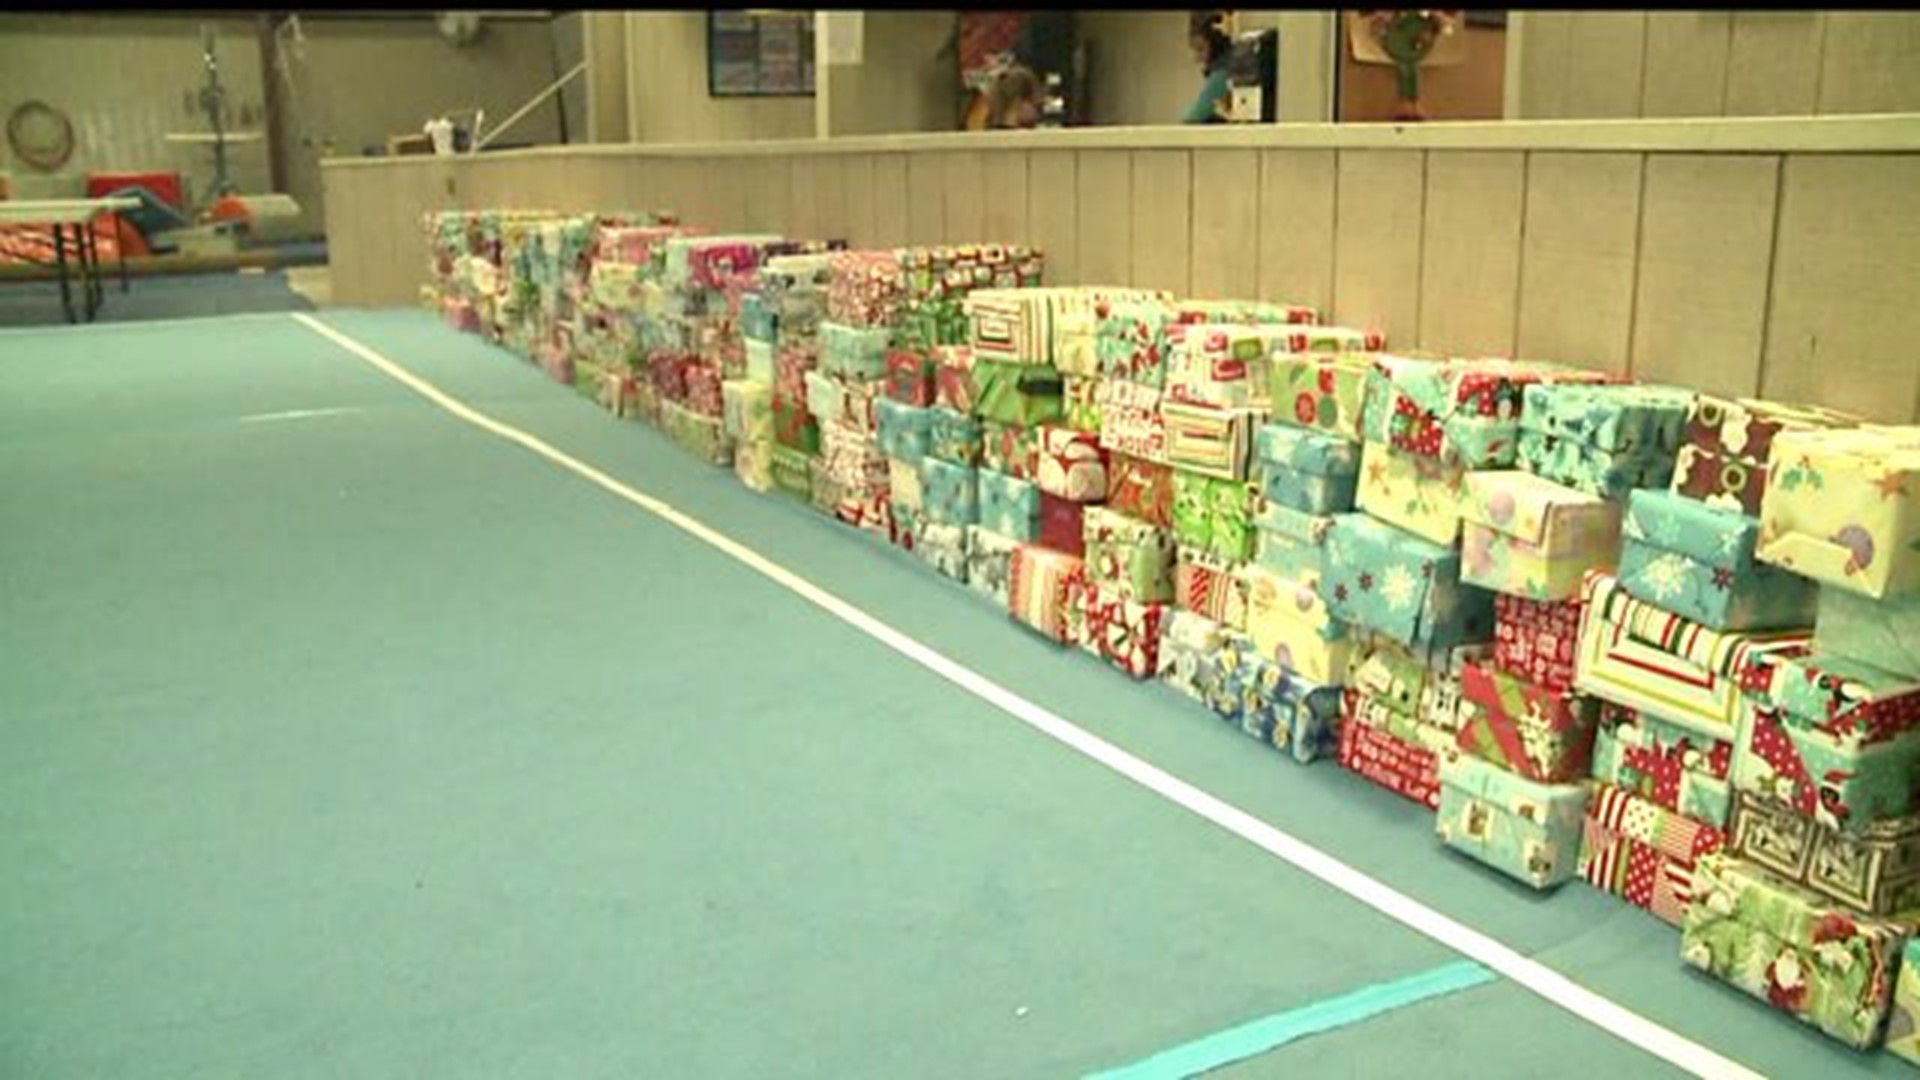 Cumberland County gymnasts collect gifts in shoe boxes to send to kids around the world